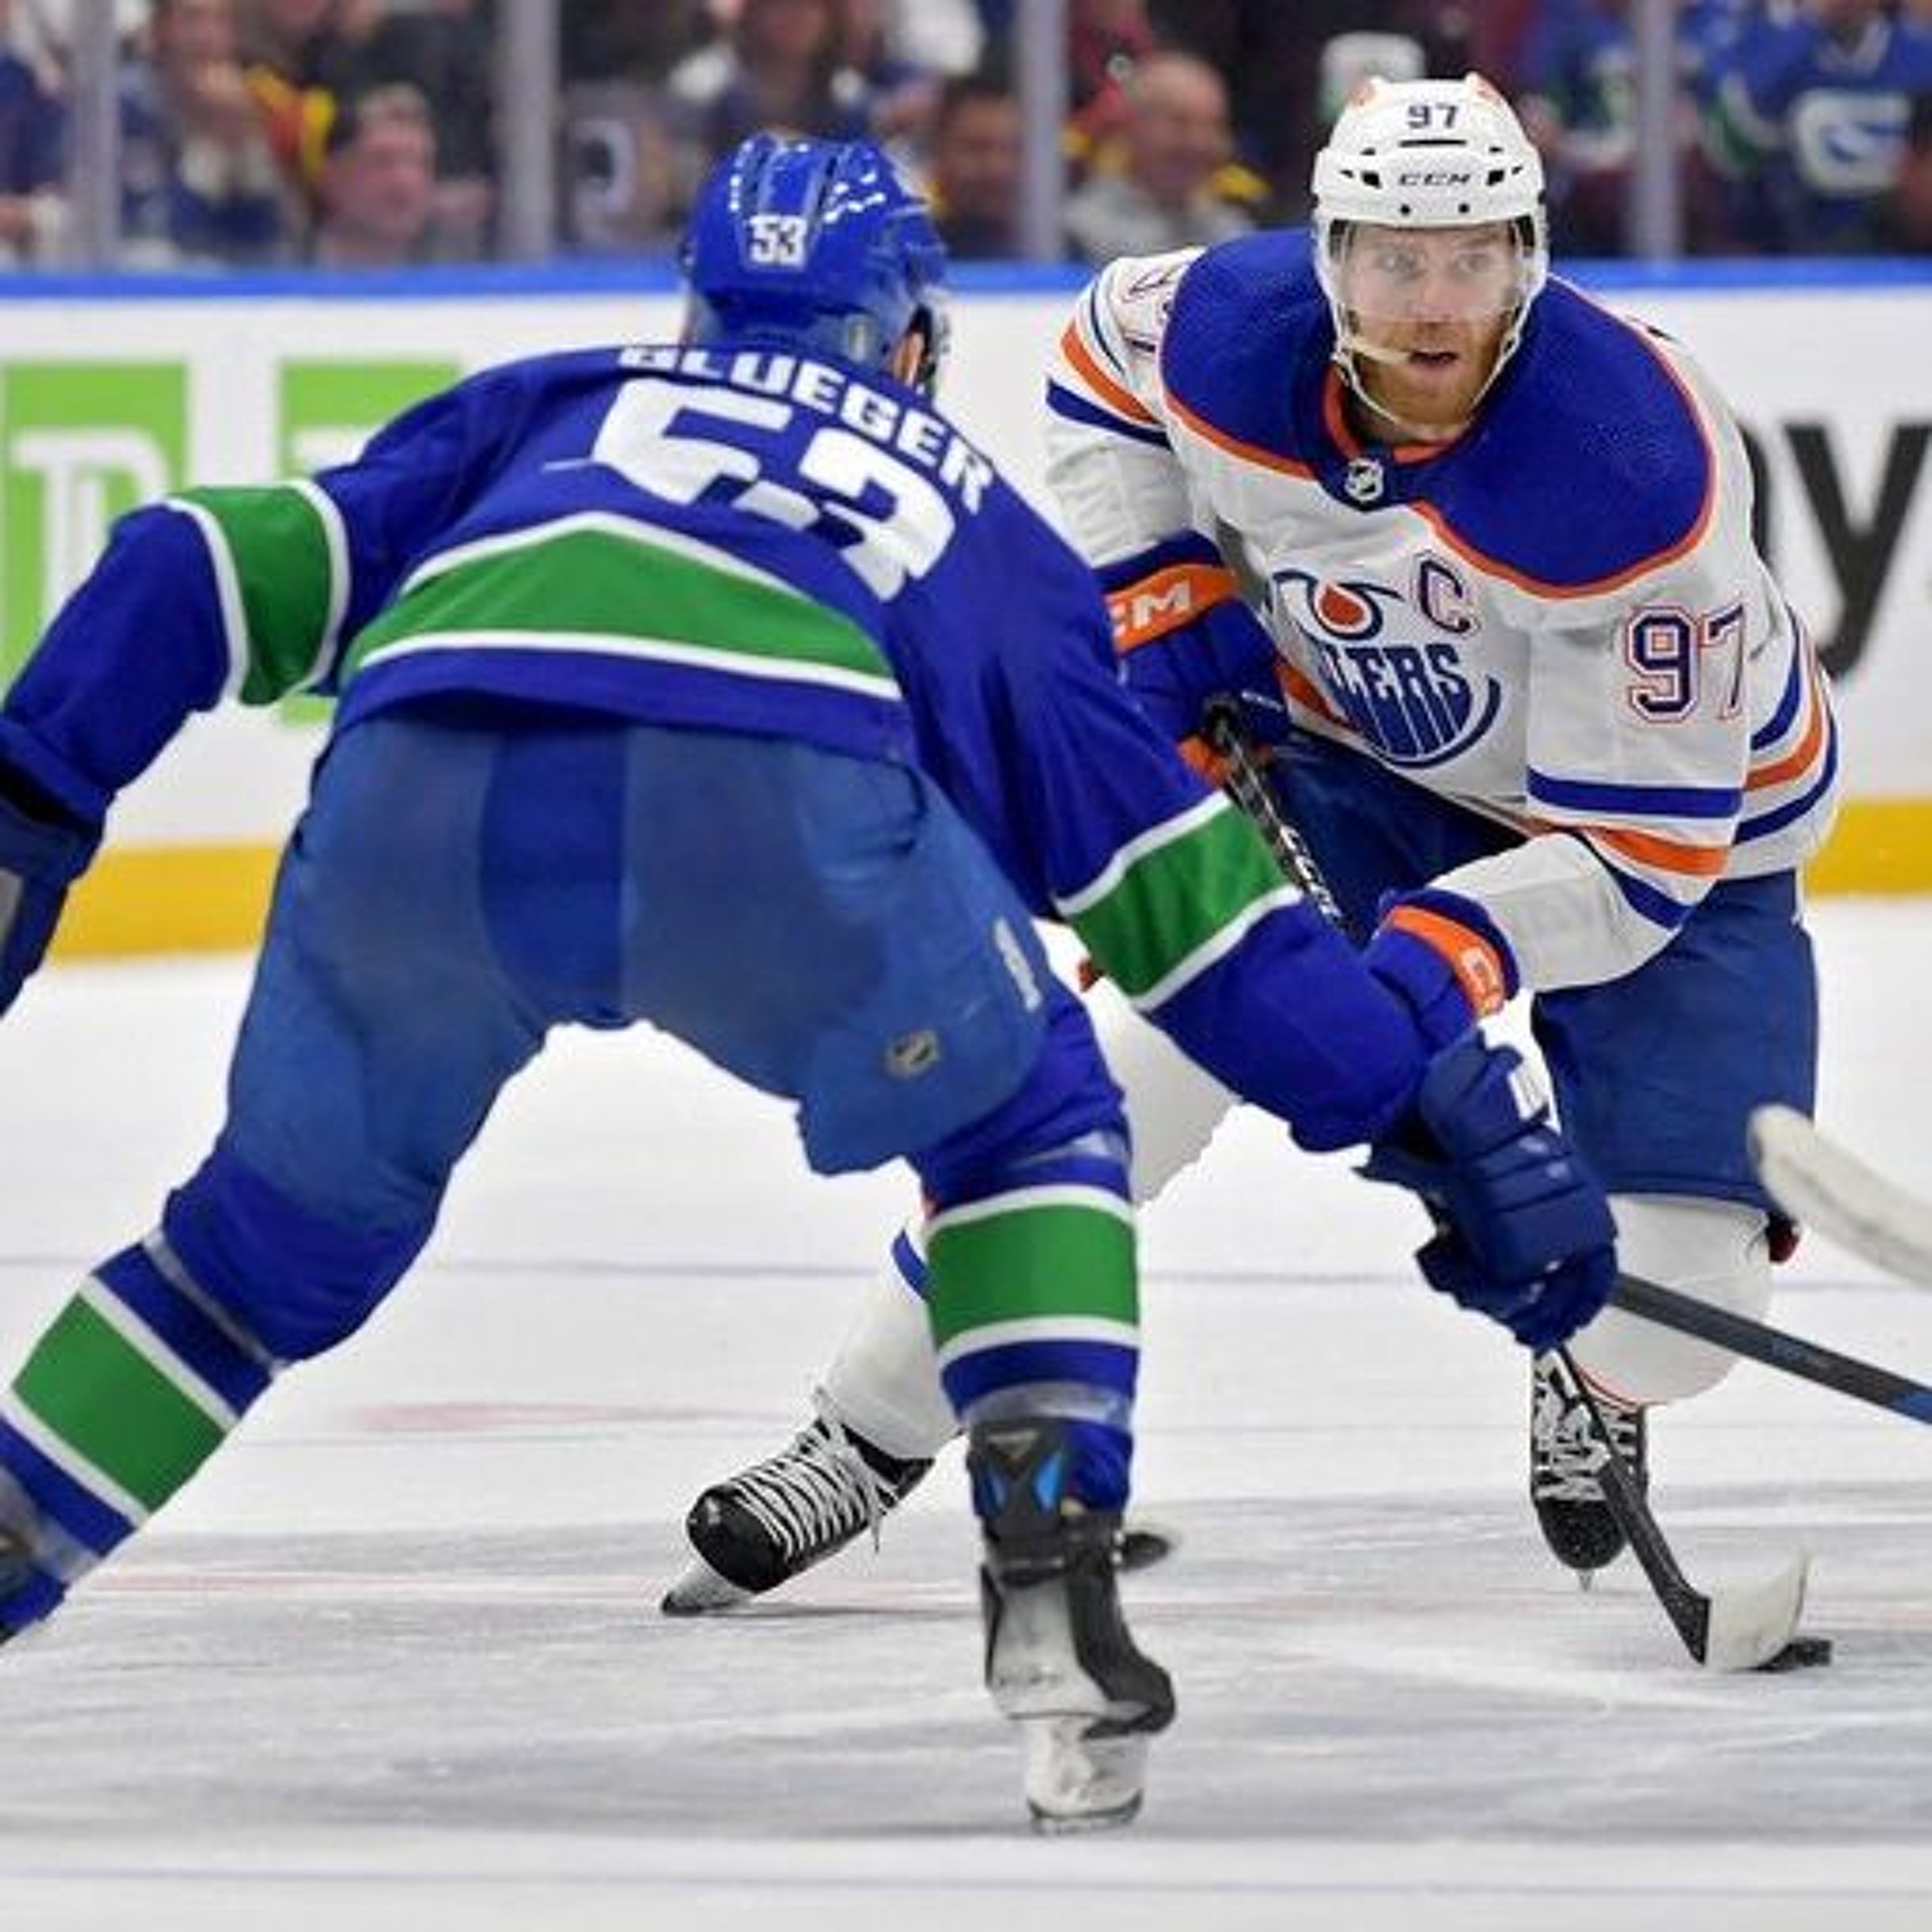 The Cult of Hockey's "Stress rules the day as Oilers beat Canucks" podcast